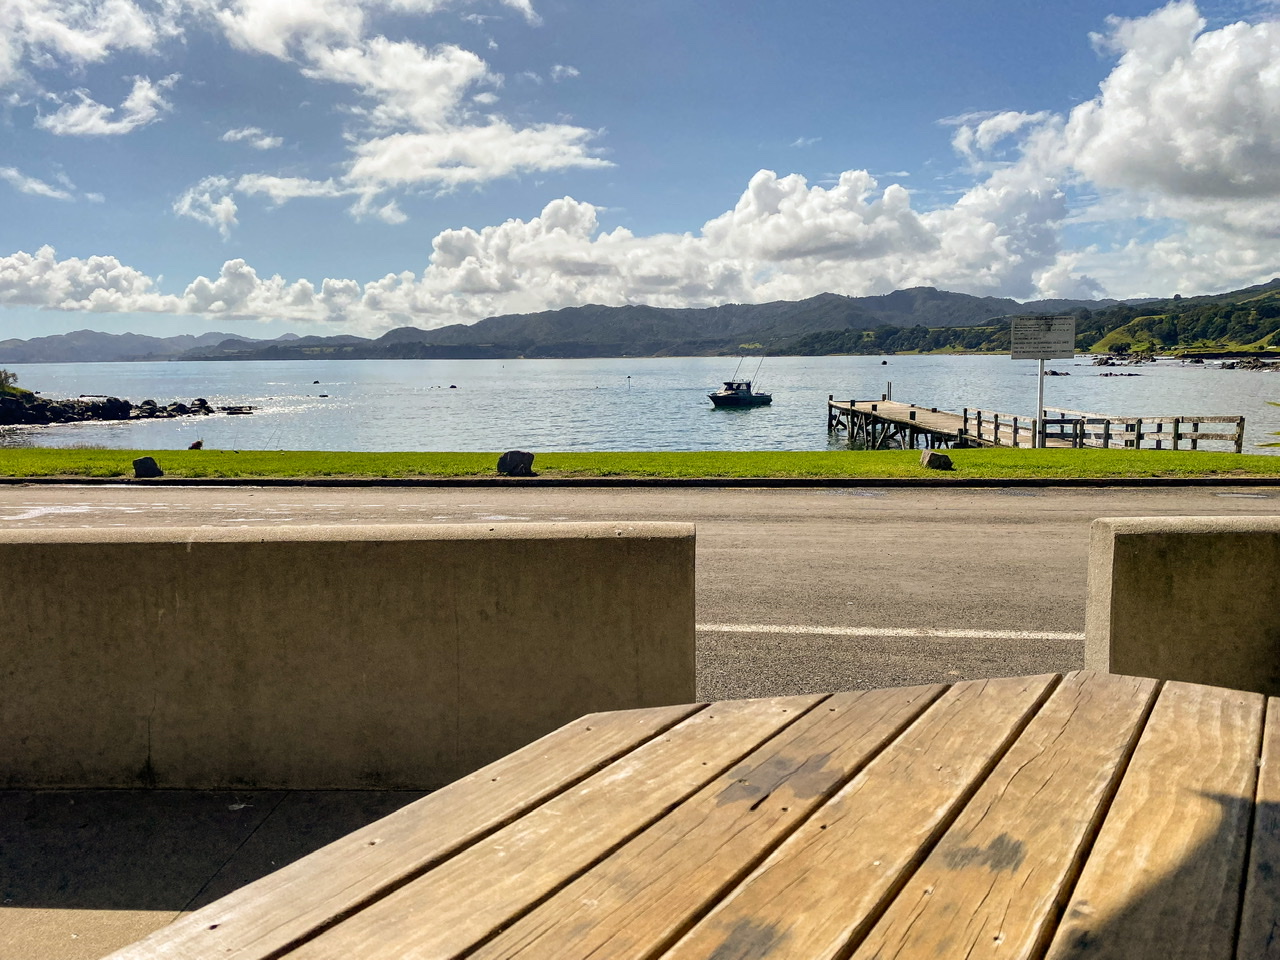 View across a road of Waihau Bay Wharf, Waihau Bay and a small boat coming in